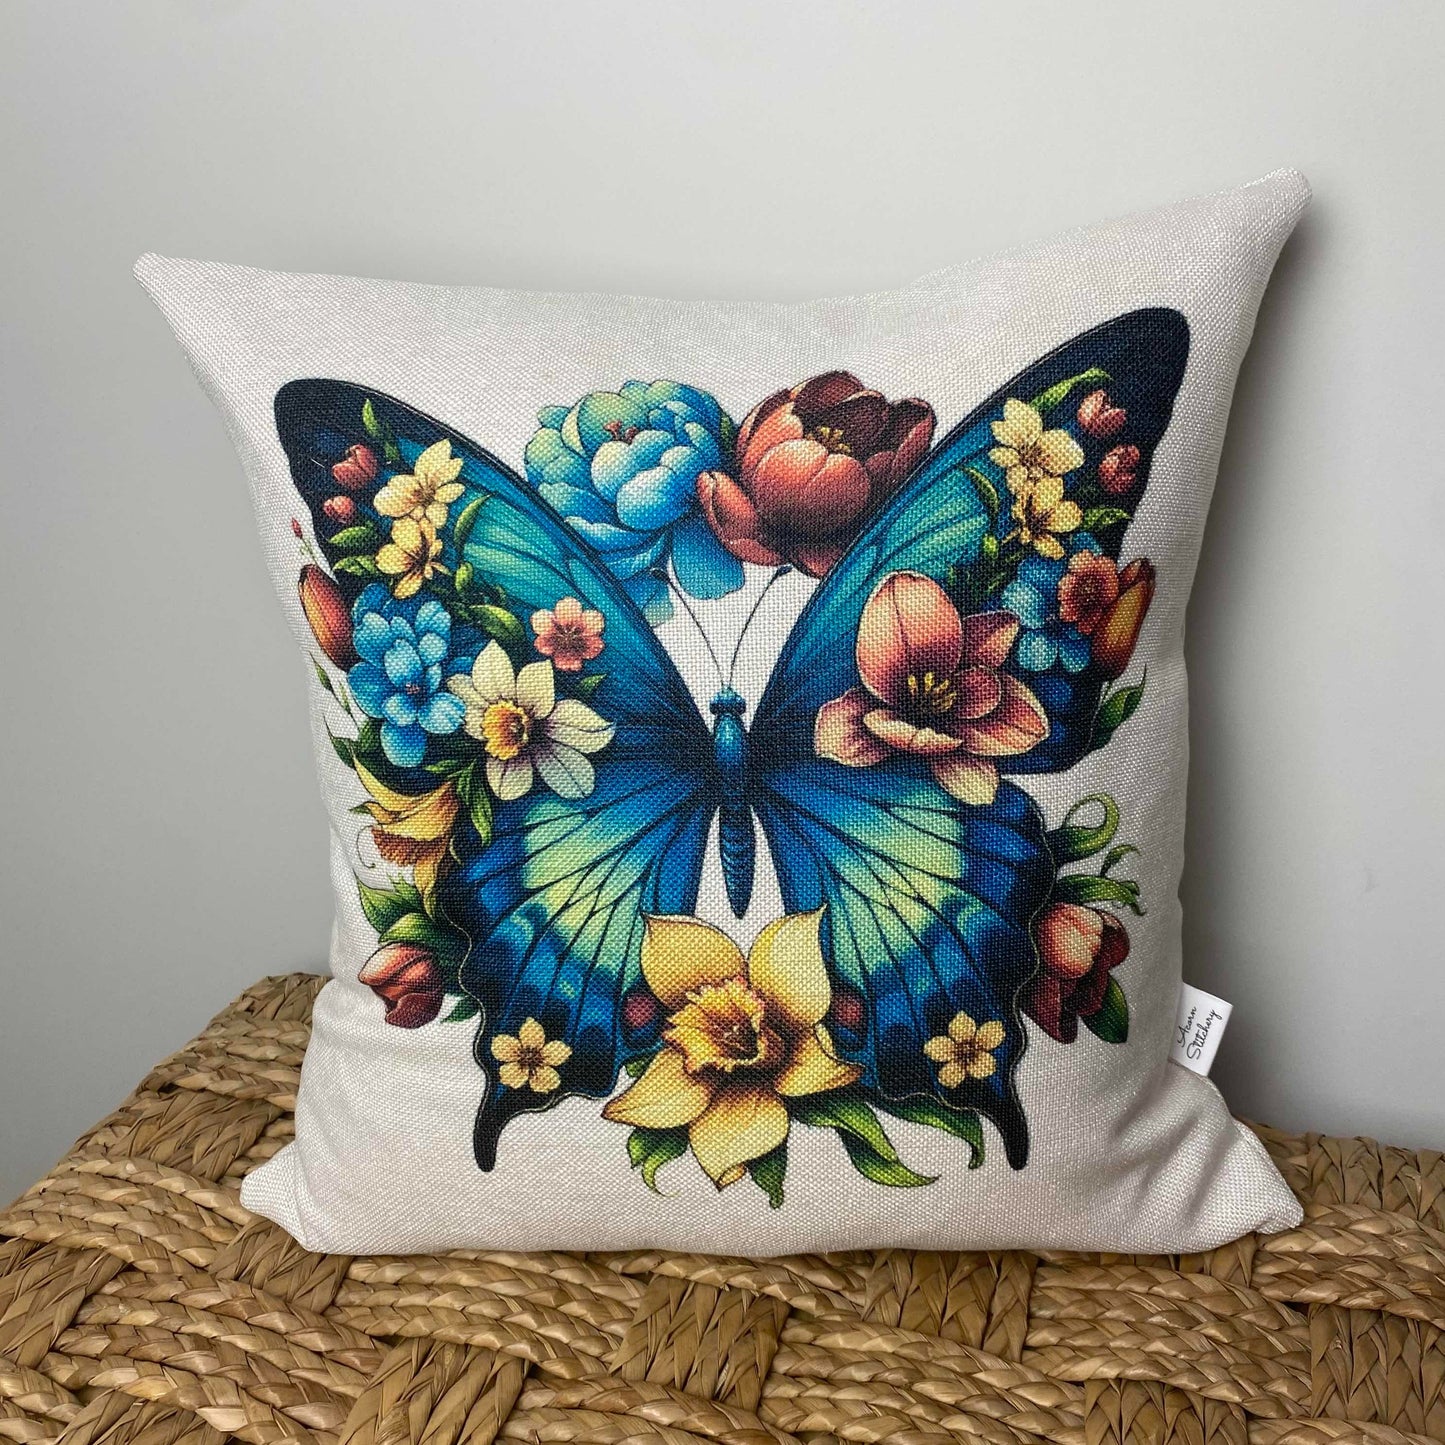 Butterfly With Flowers pillow 18" x 18"